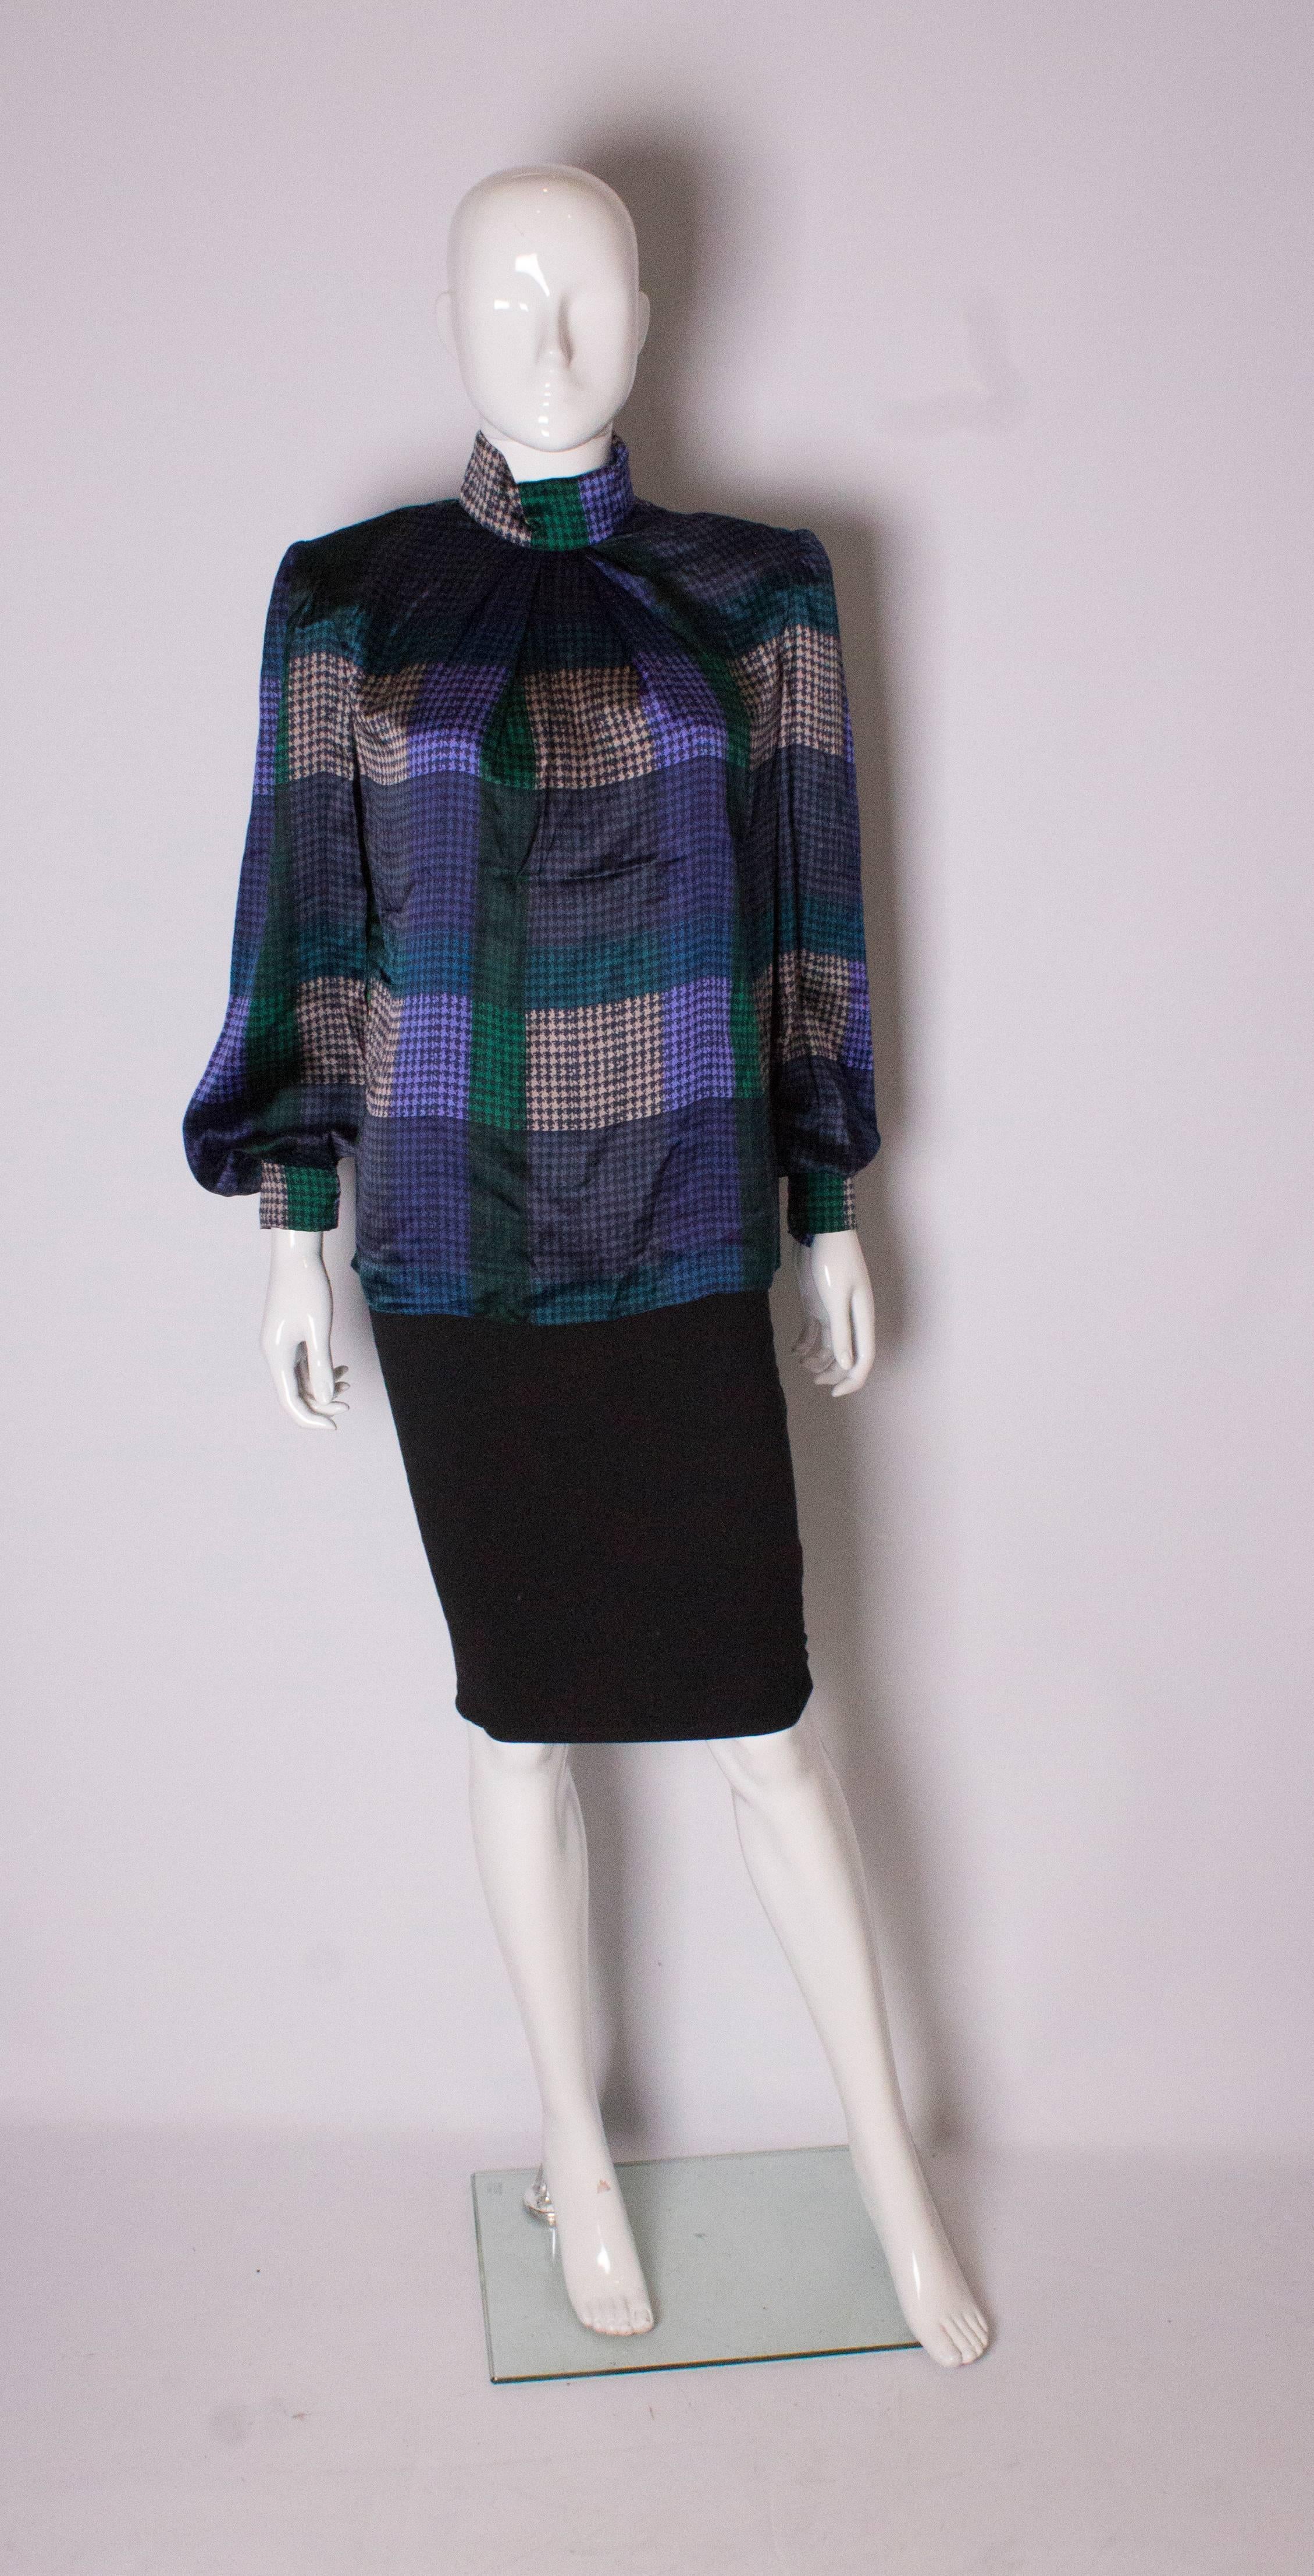 A chic vintage silk blouse by Donald Campbell. In a hounds tooth print, in grey, green , purple and black. The blouse has a stand up collar, zip back and popper cuffs. 